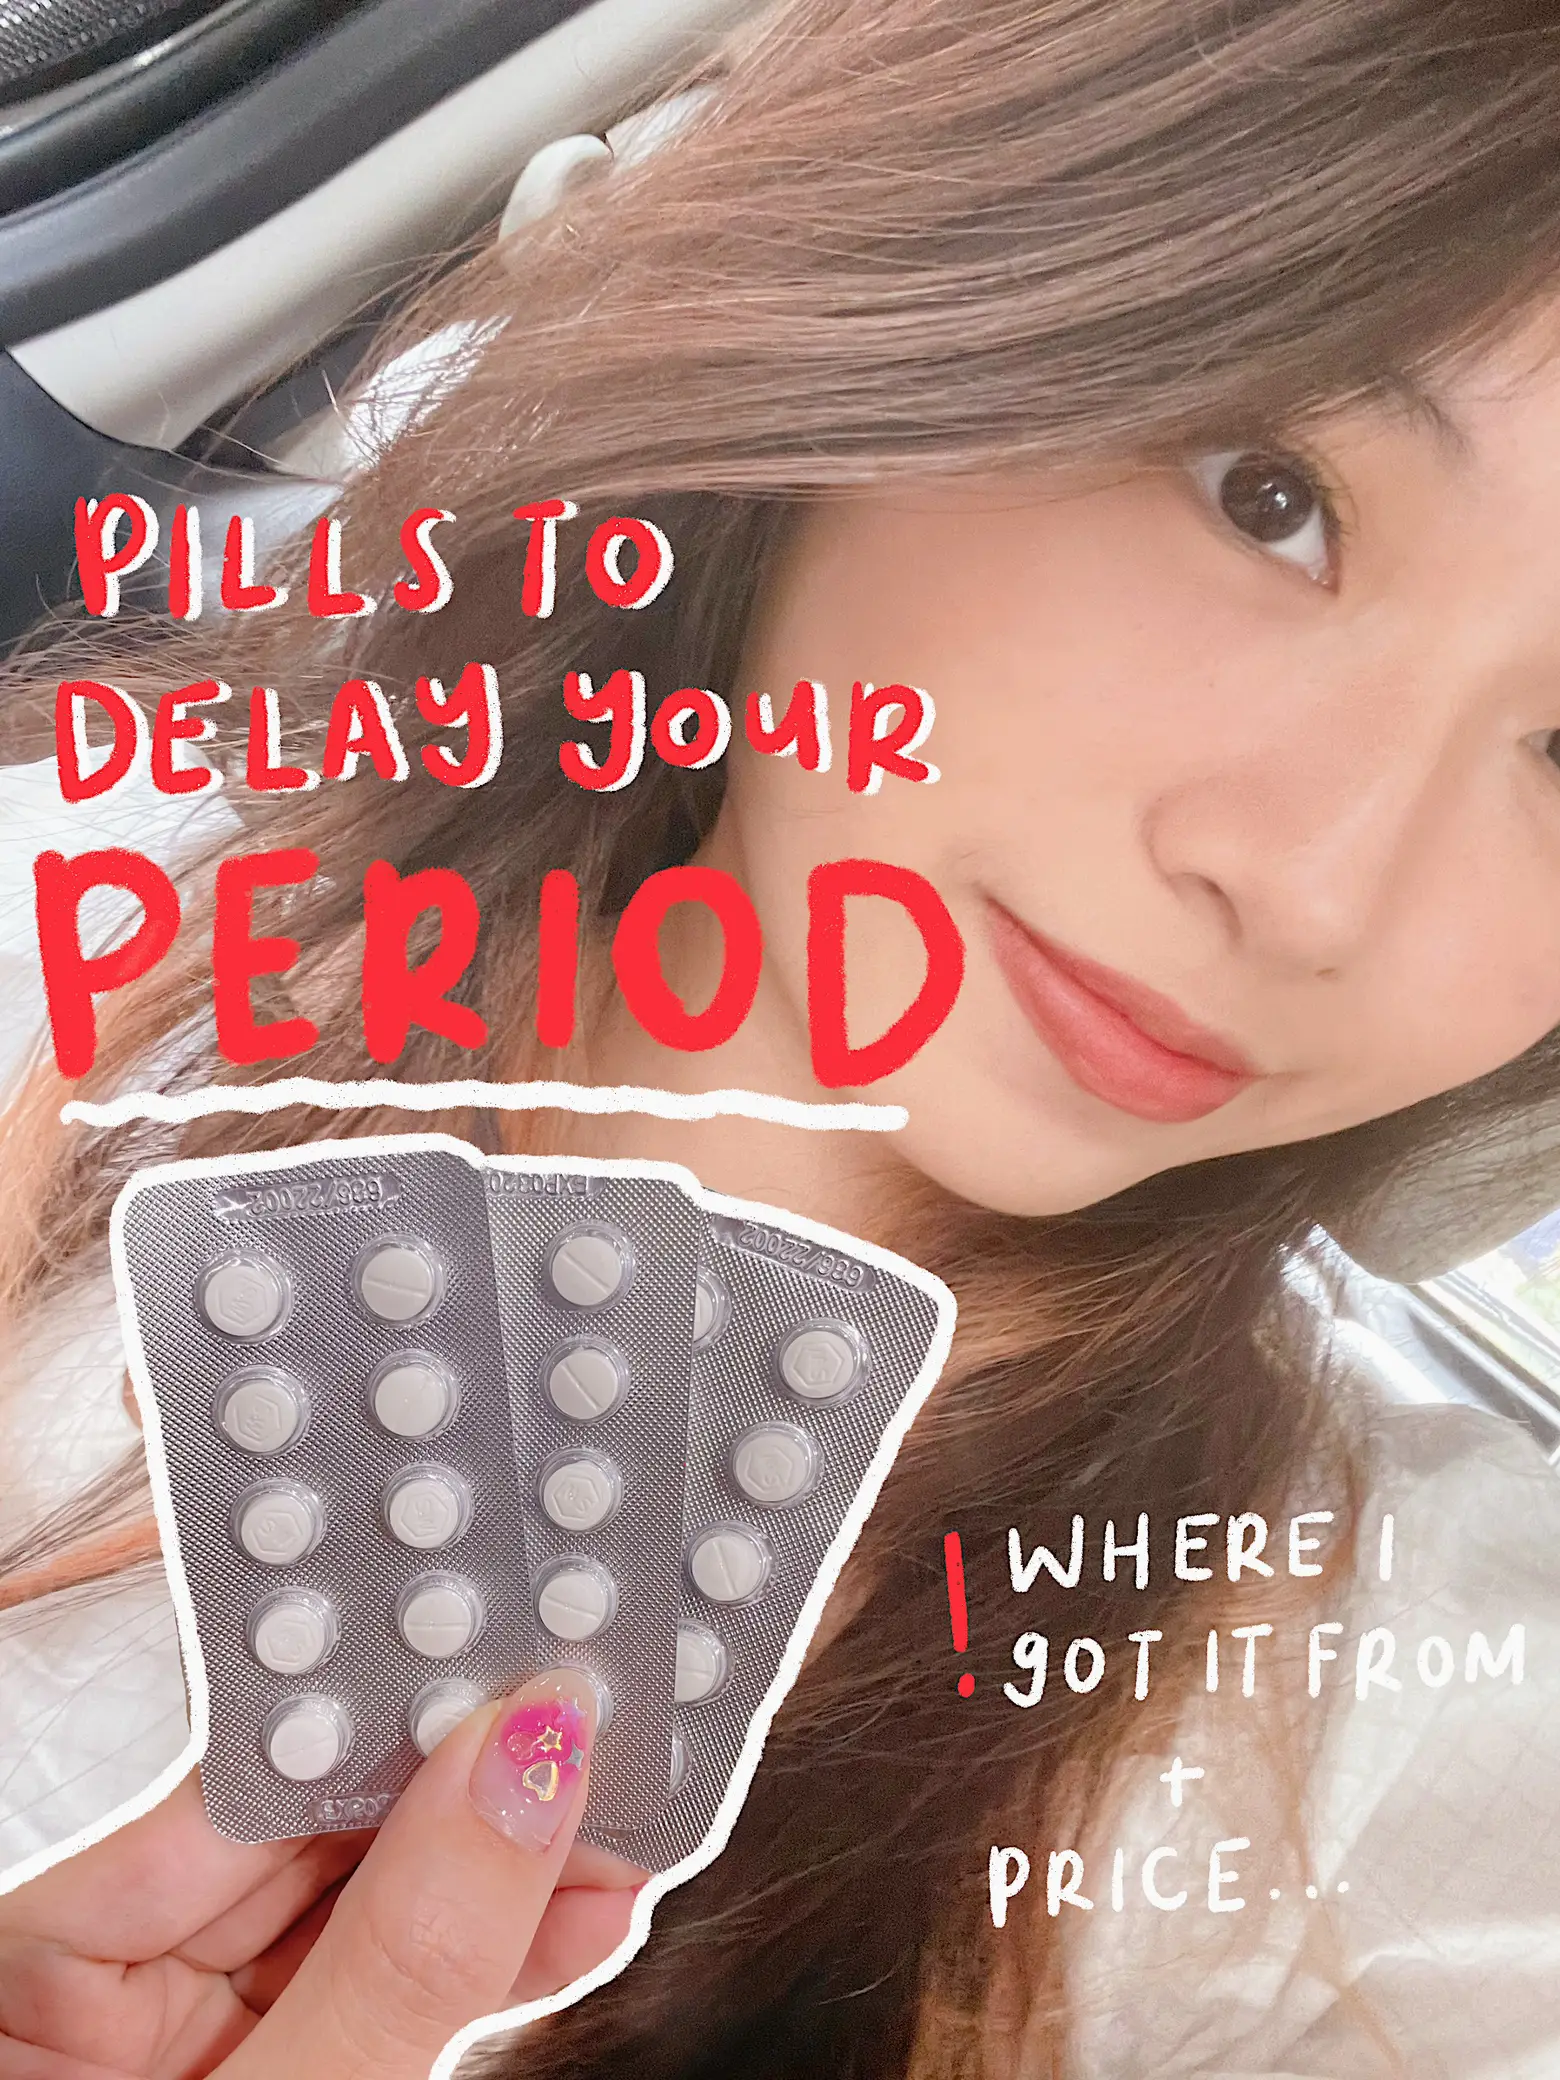 i got this pill to delay my period…?😳🩸🚫 's images